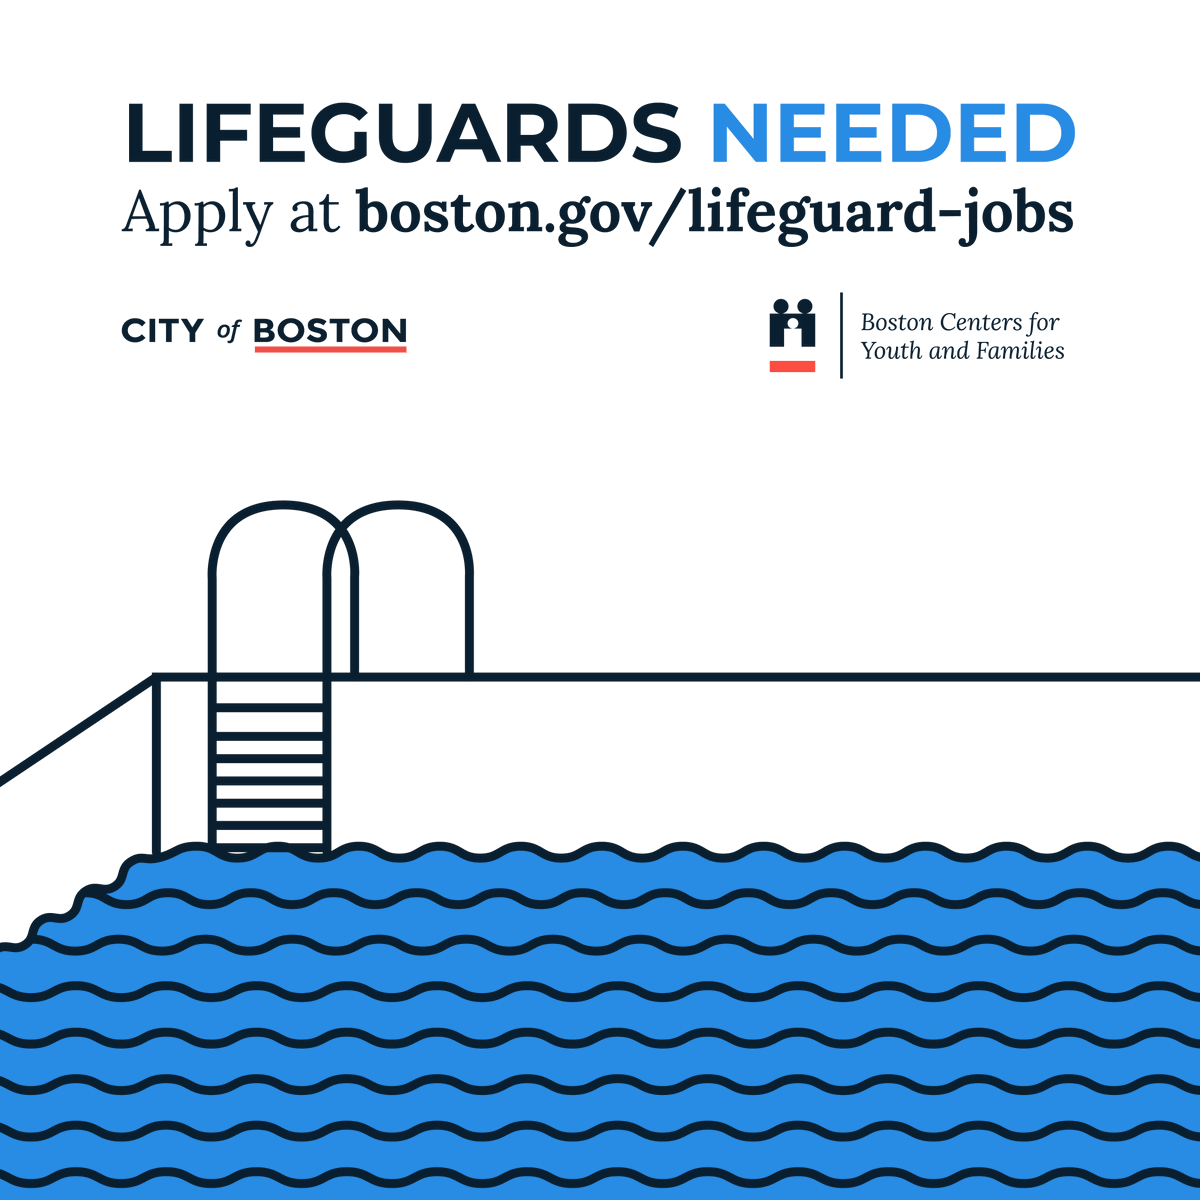 Are you looking for a summer job? Have the best summer ever as a Boston lifeguard! Apply at boston.gov/lifeguard-jobs.